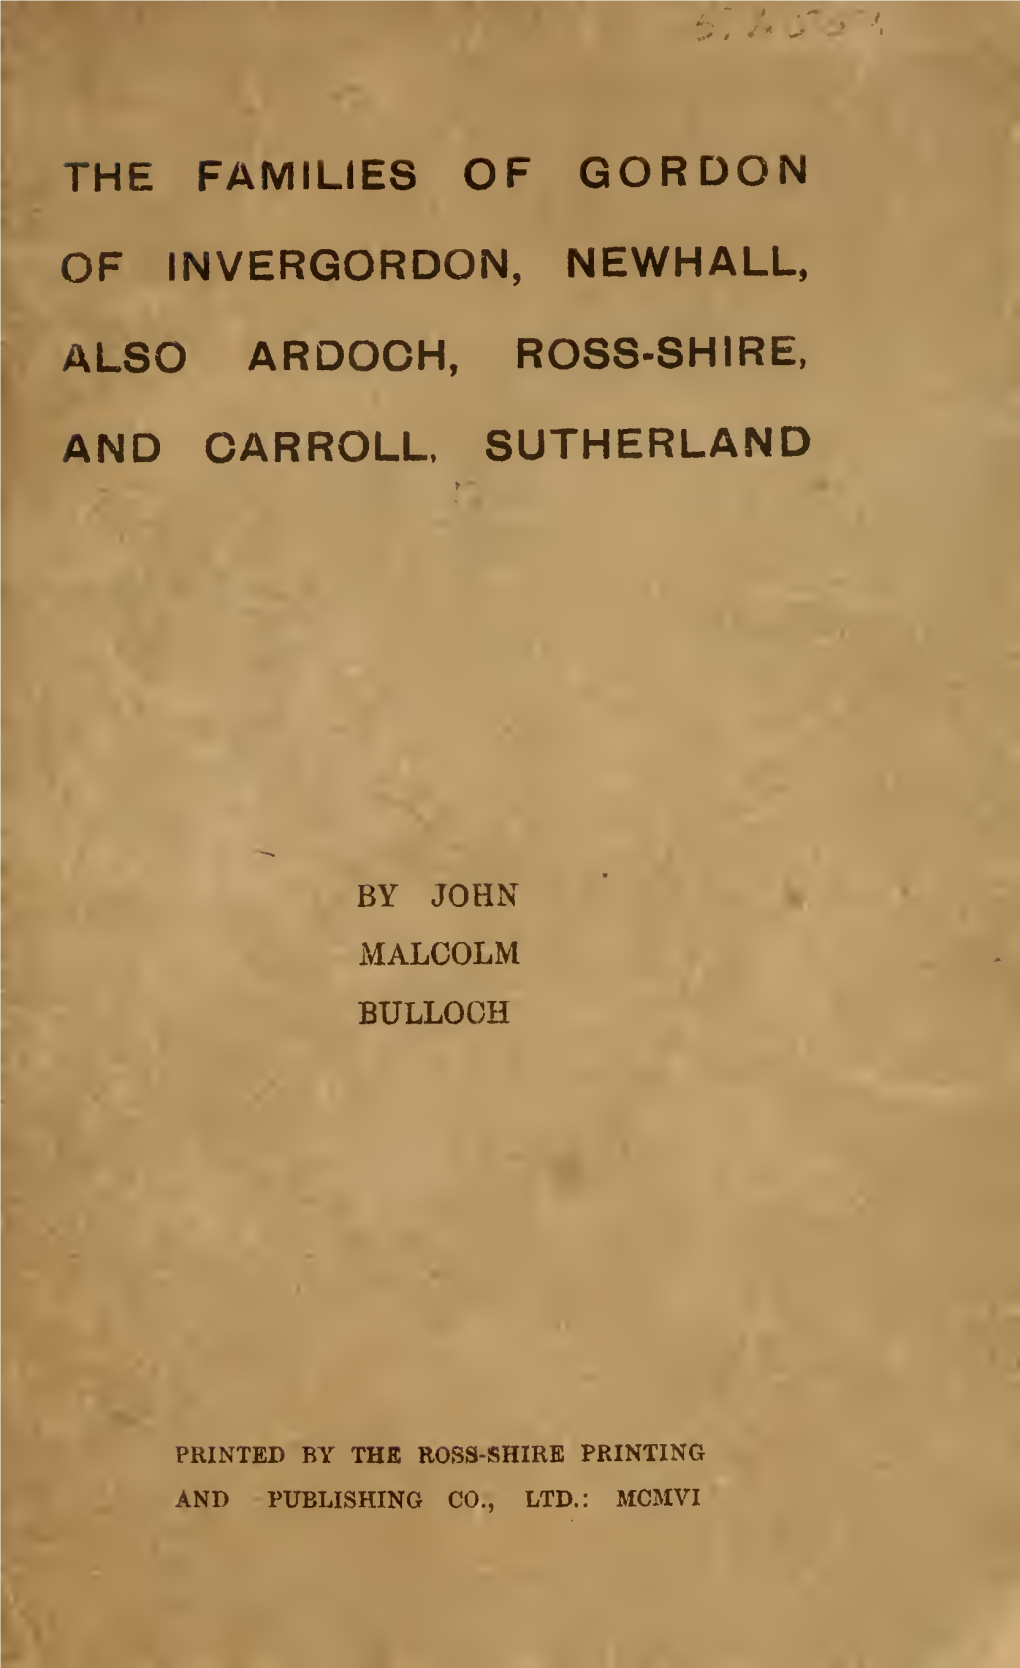 The Families of Gordon of Invergordon, Newhall, Also Ardoch, Ross-Shire, and Carroll, Sutherland